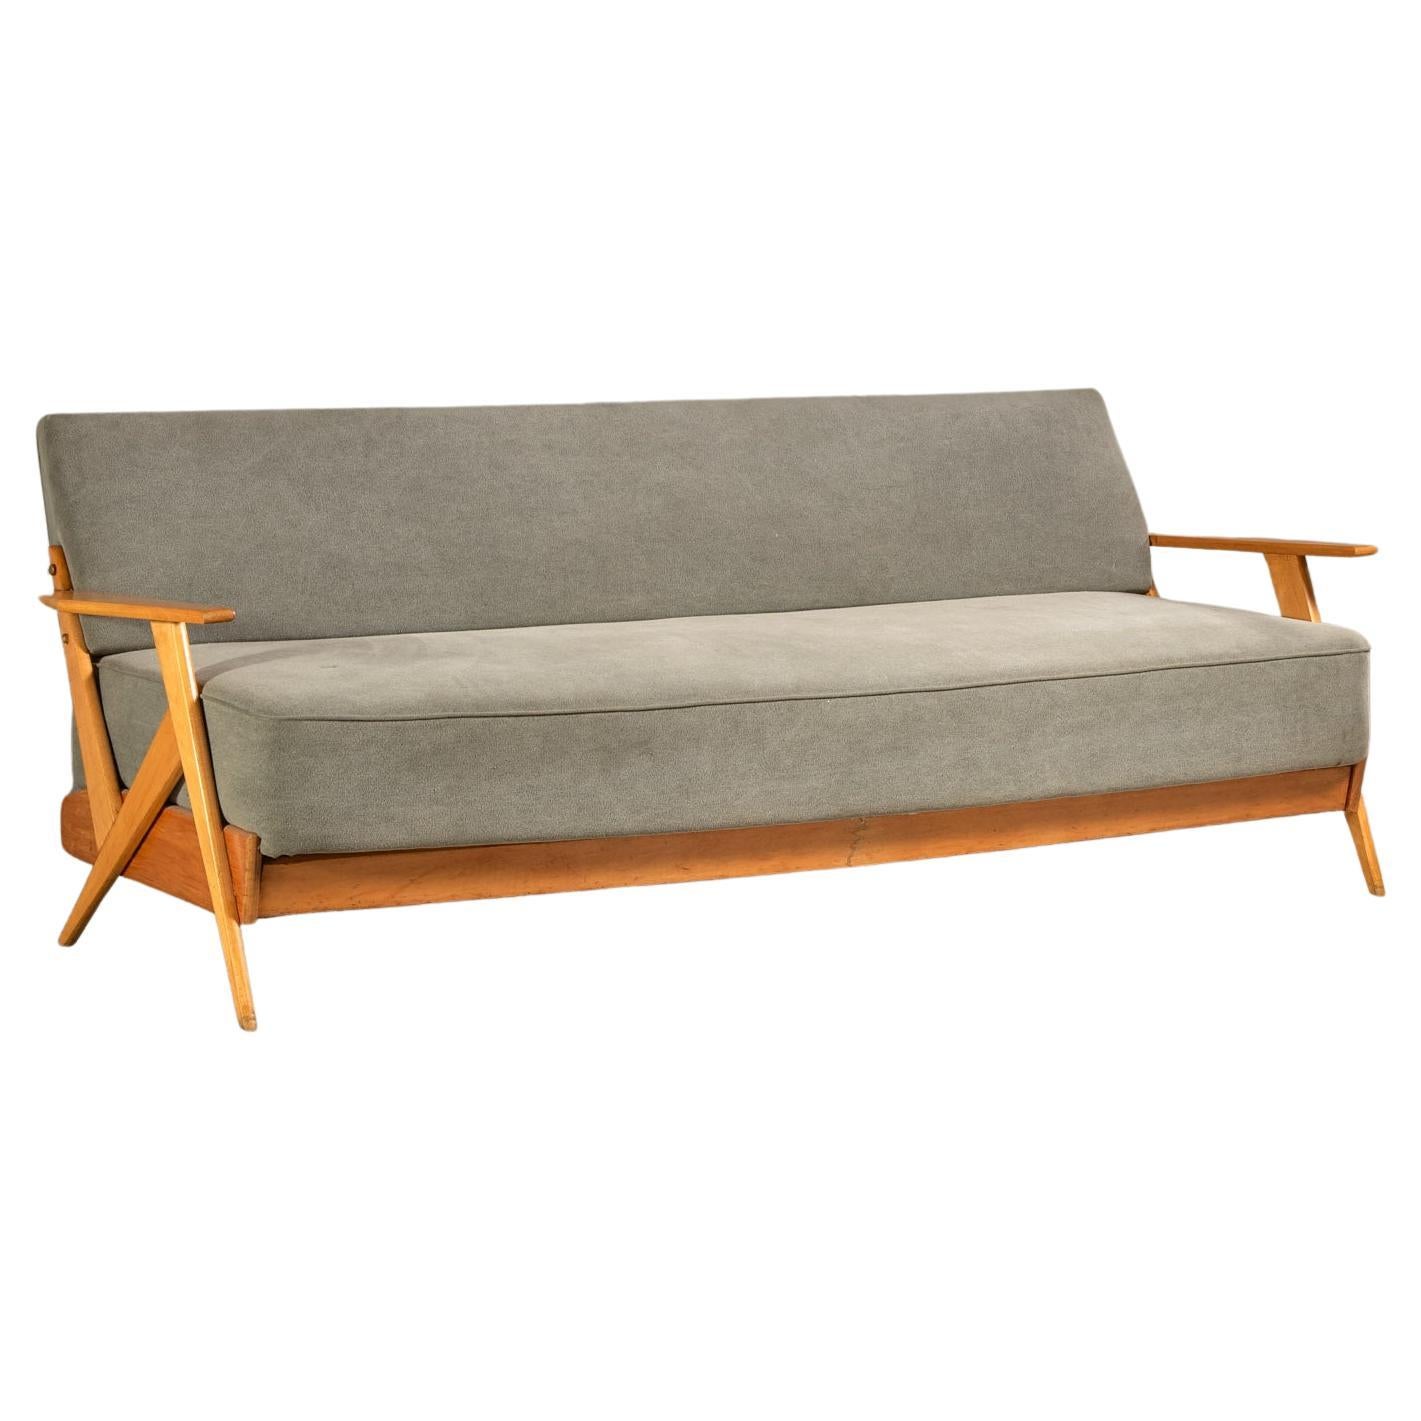 Sofa in wood and fabric, by Móveis Artísticos Z, Brazilian Mid-Century Modern For Sale